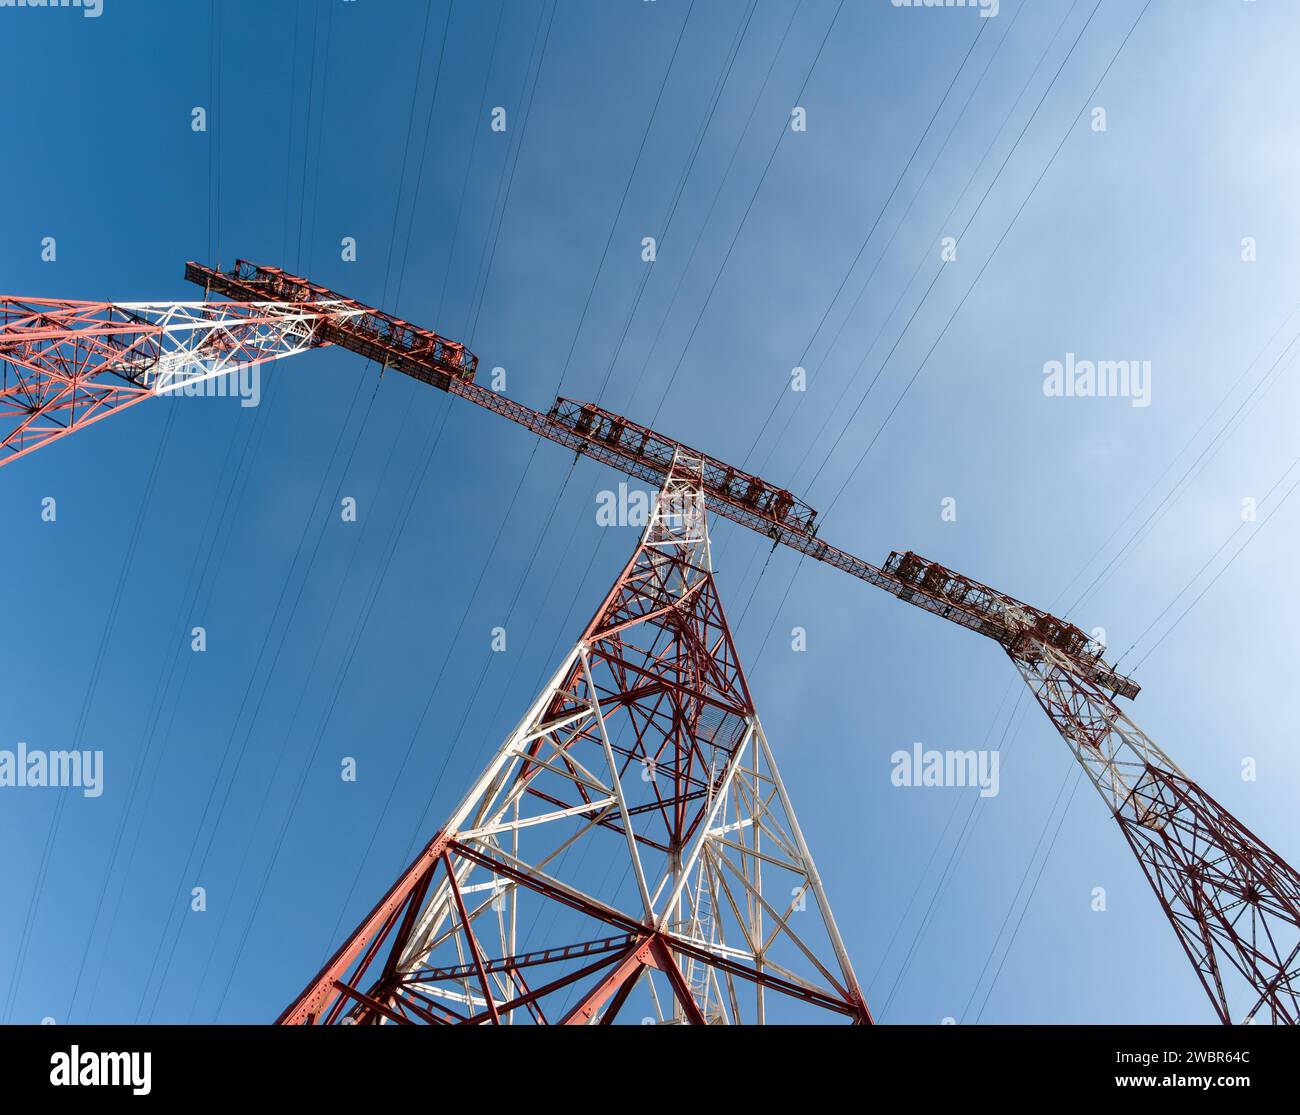 Very tall electrical towers for transmitting high voltage current from a power plant against a blue sky background, shot with an ultra-wide-angle lens Stock Photo